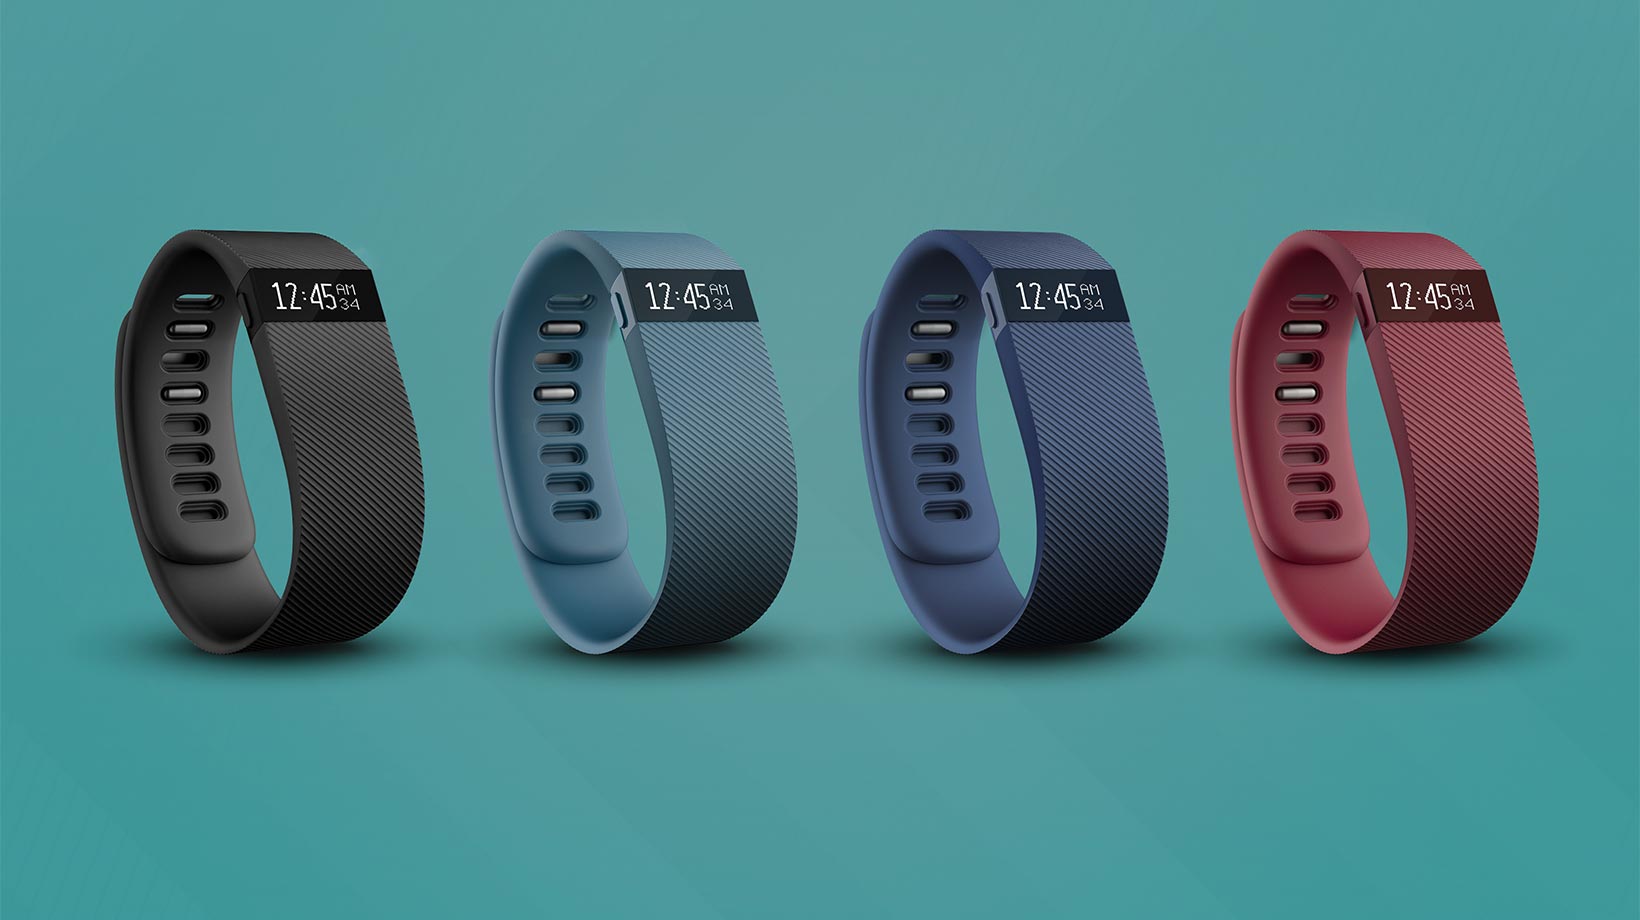 The Fitbit Charge HR activity wristband (Photo courtesy of Fitbit).